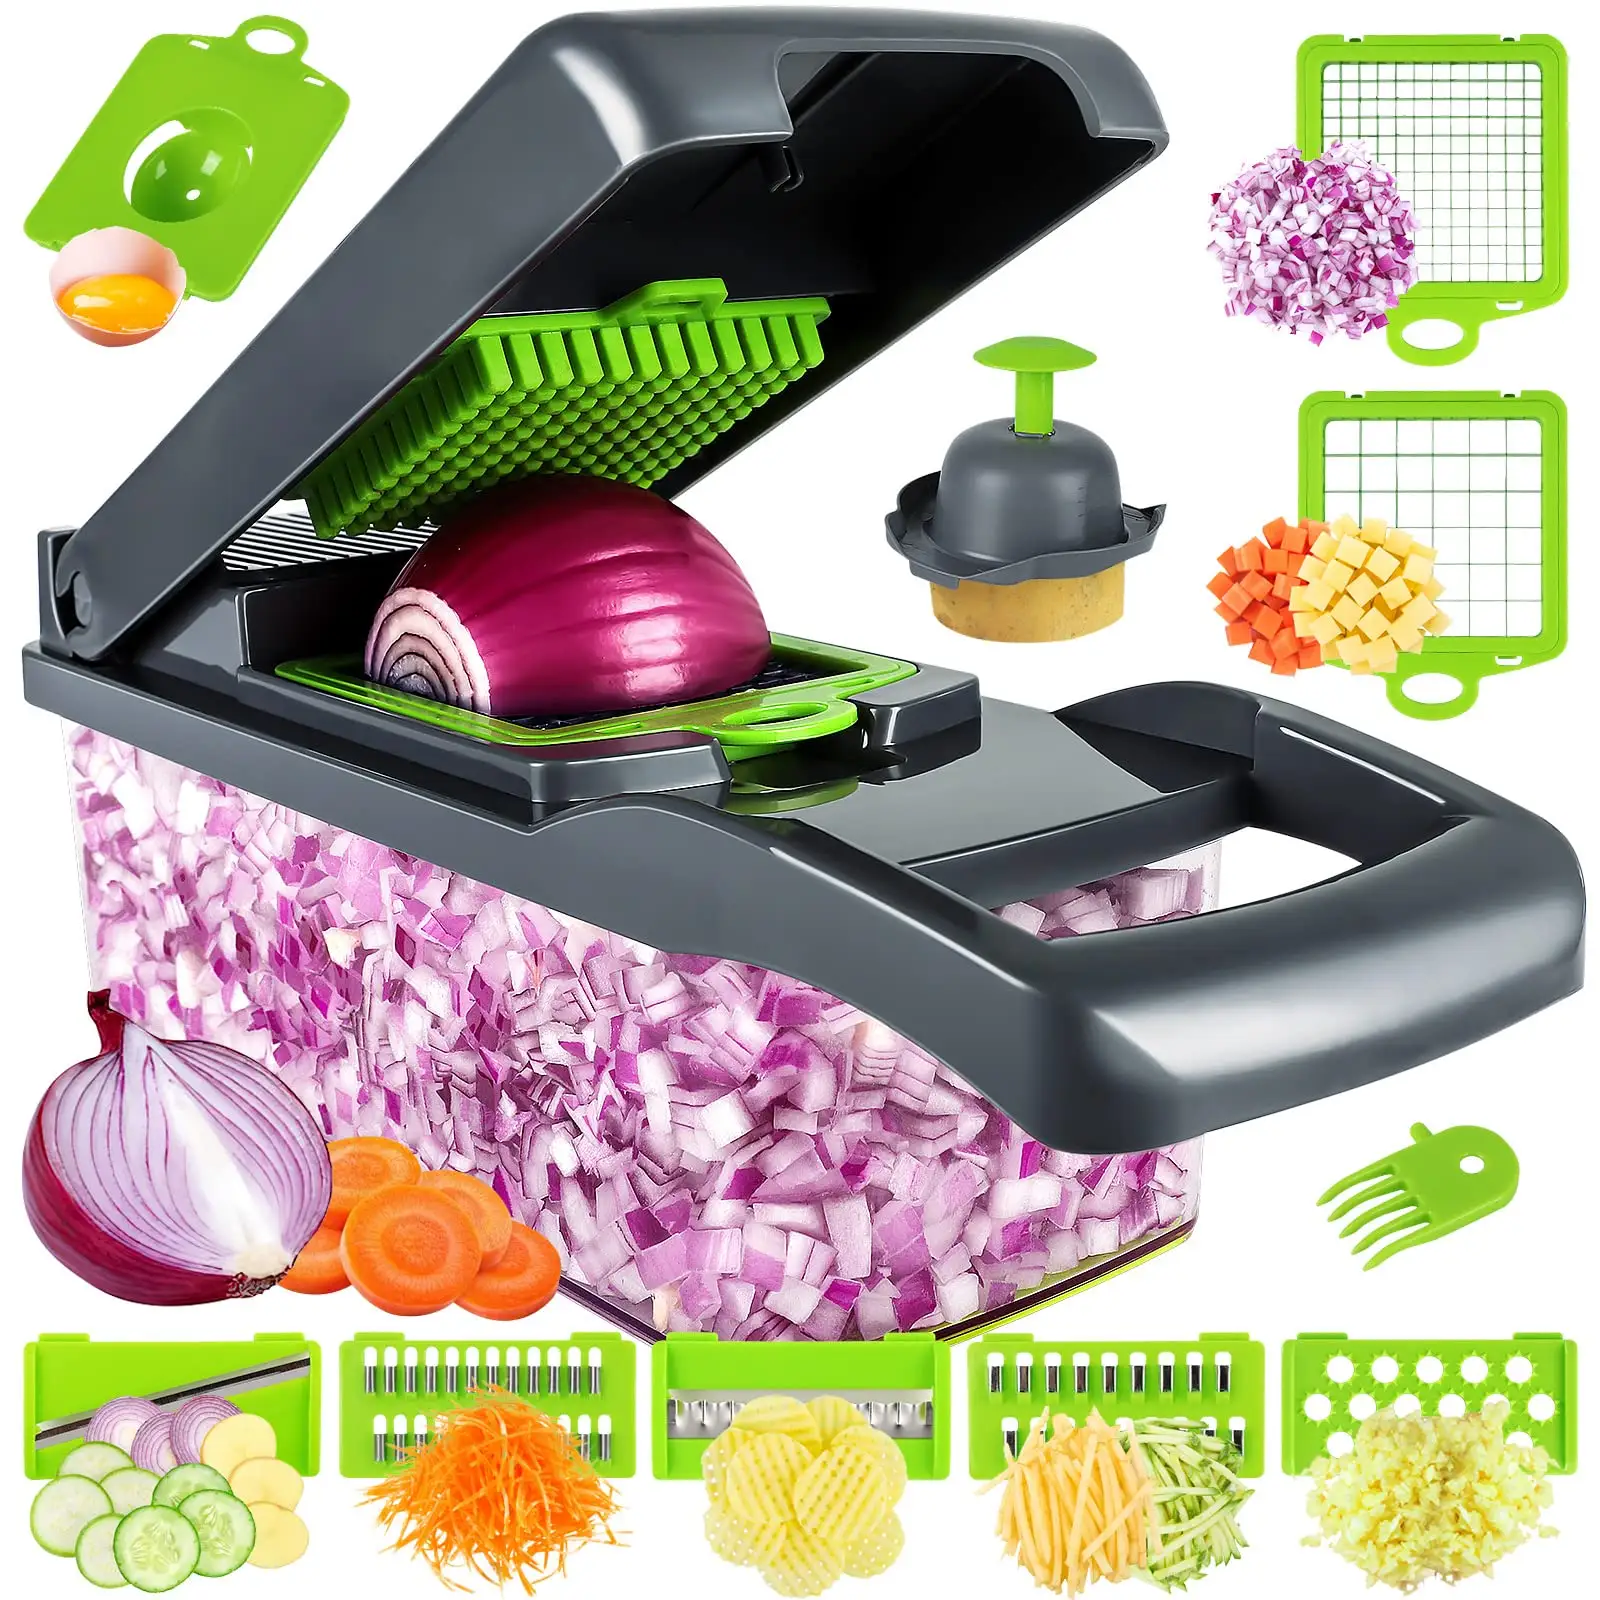 Top Sale Factory wholesale Kitchen Accessories 12 in 1 Food Cutter Veggie Onion Chopper Slicer Multifunctional Vegetable Cutter